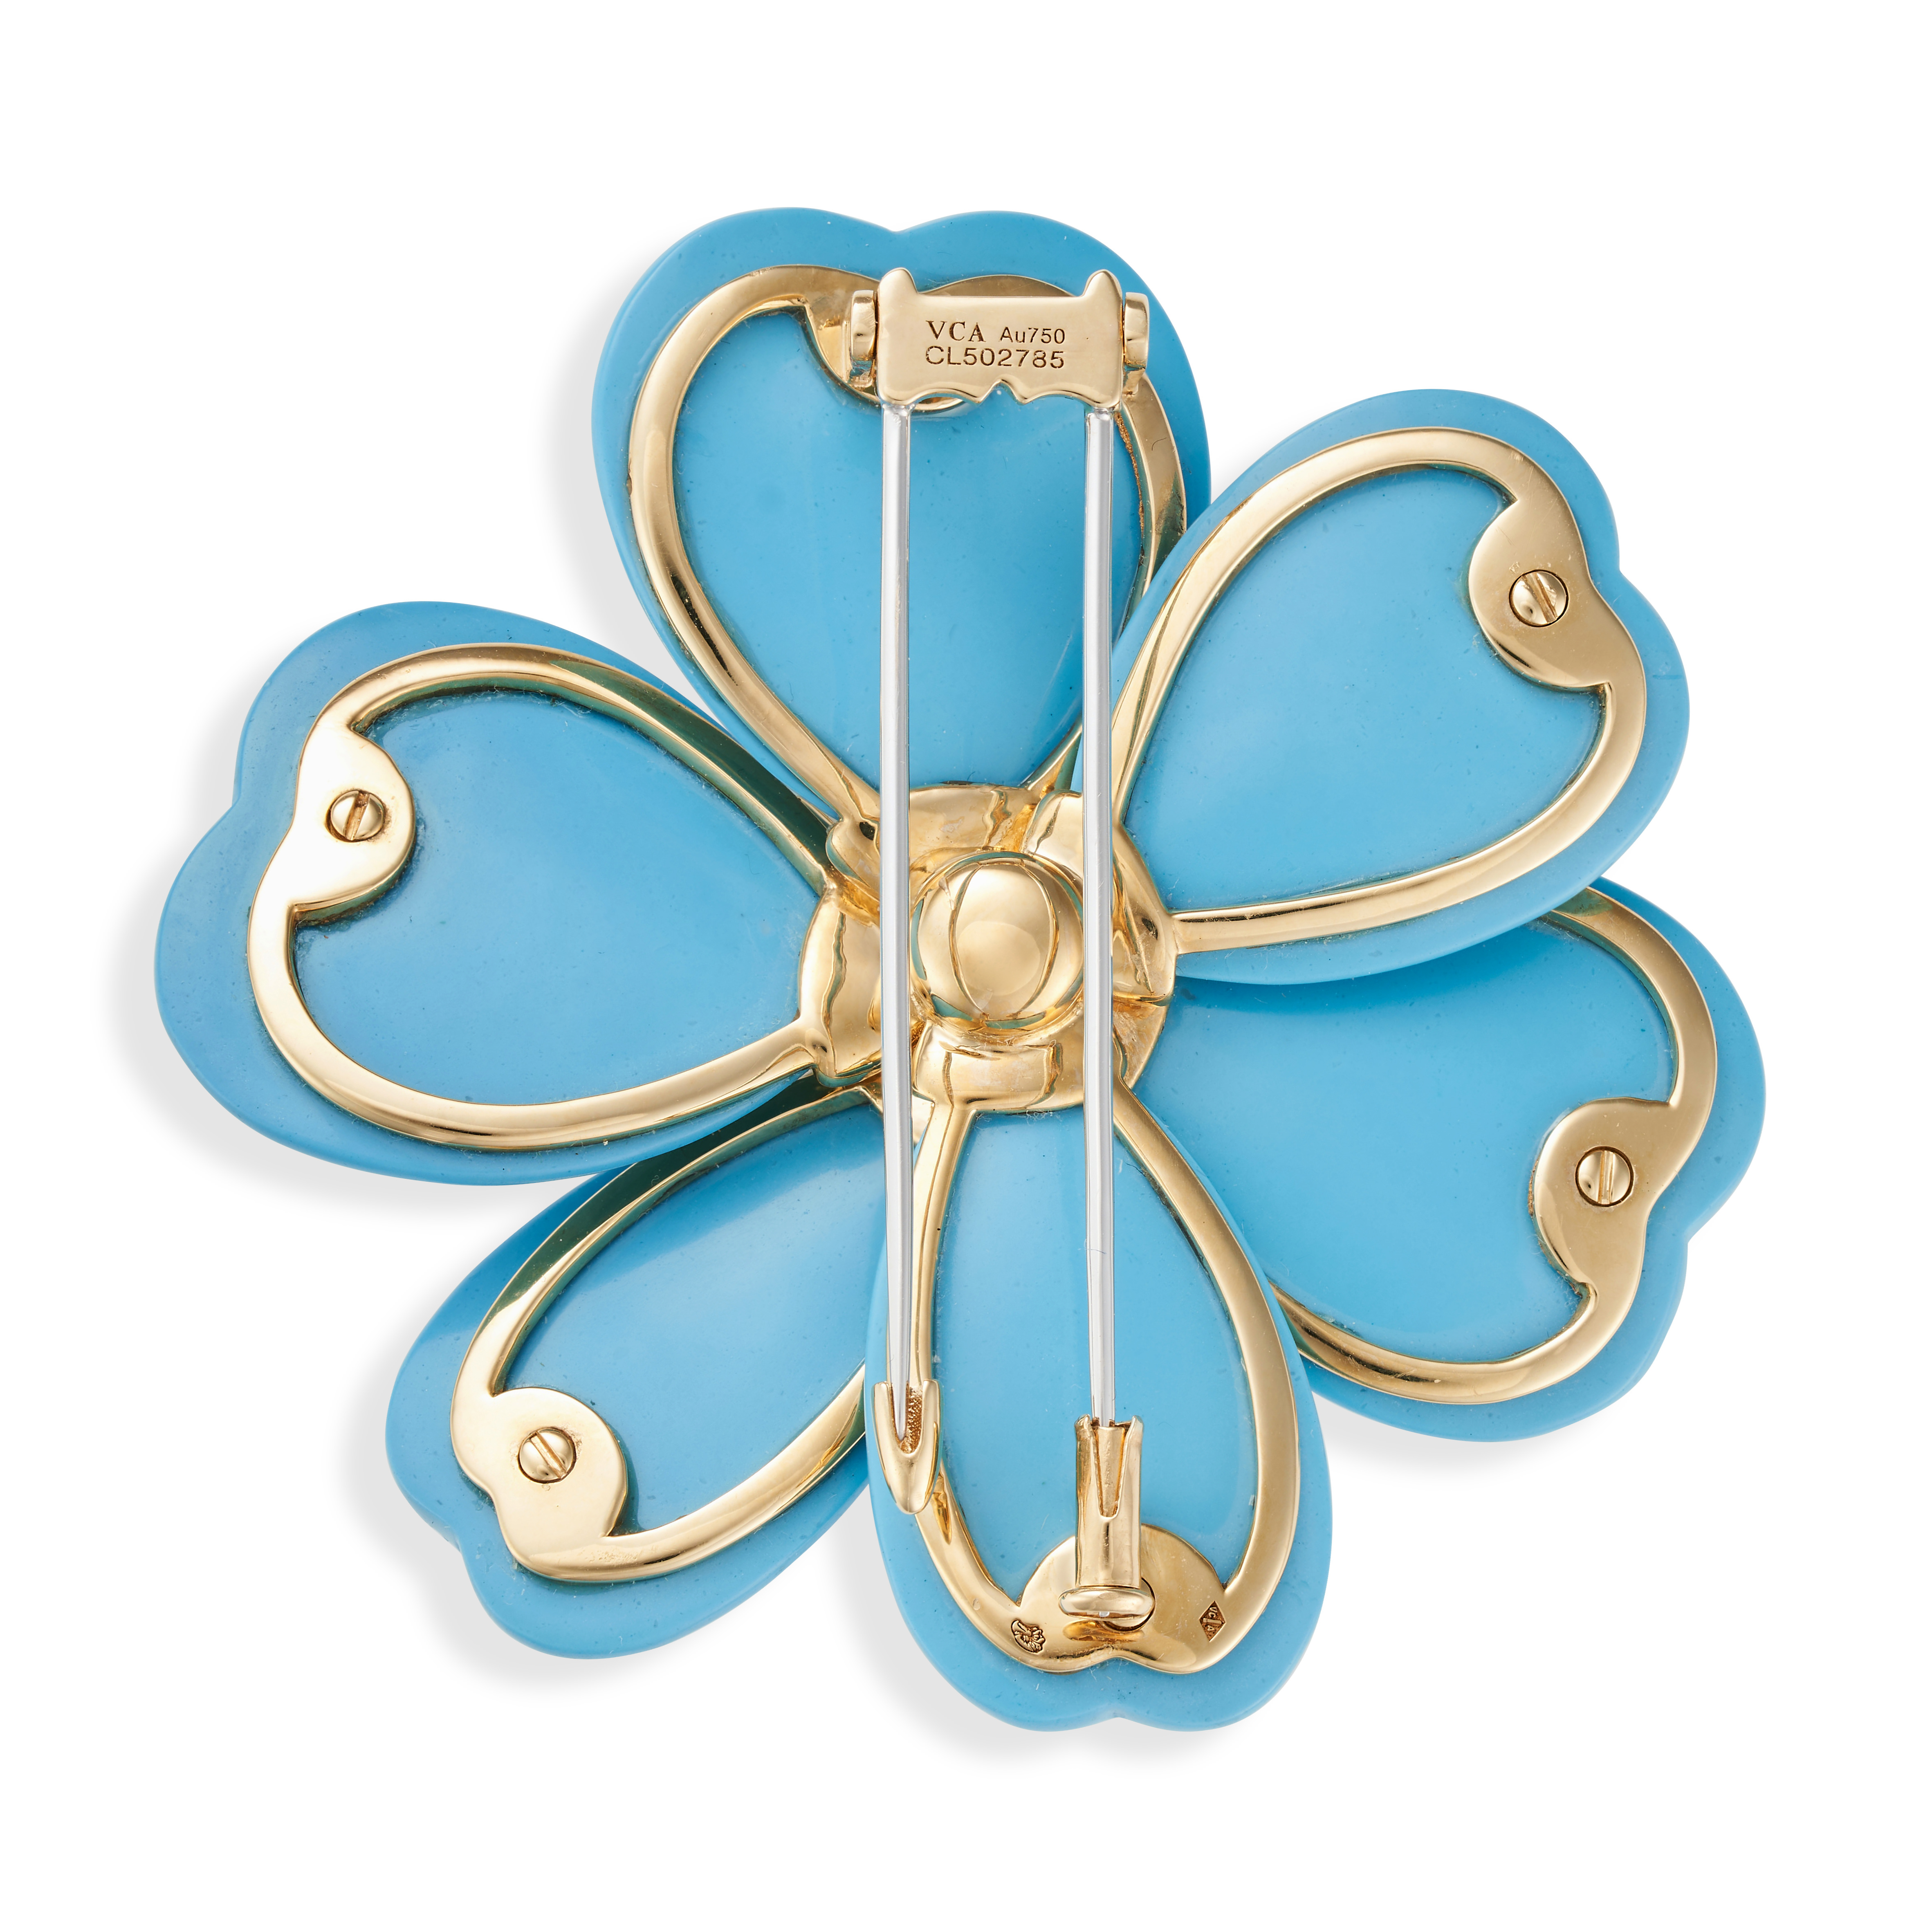 VAN CLEEF AND ARPELS, A RARE AND IMPORTANT TURQUOISE AND DIAMOND ROSE DE NOEL BROOCH in 18ct yell... - Image 2 of 2